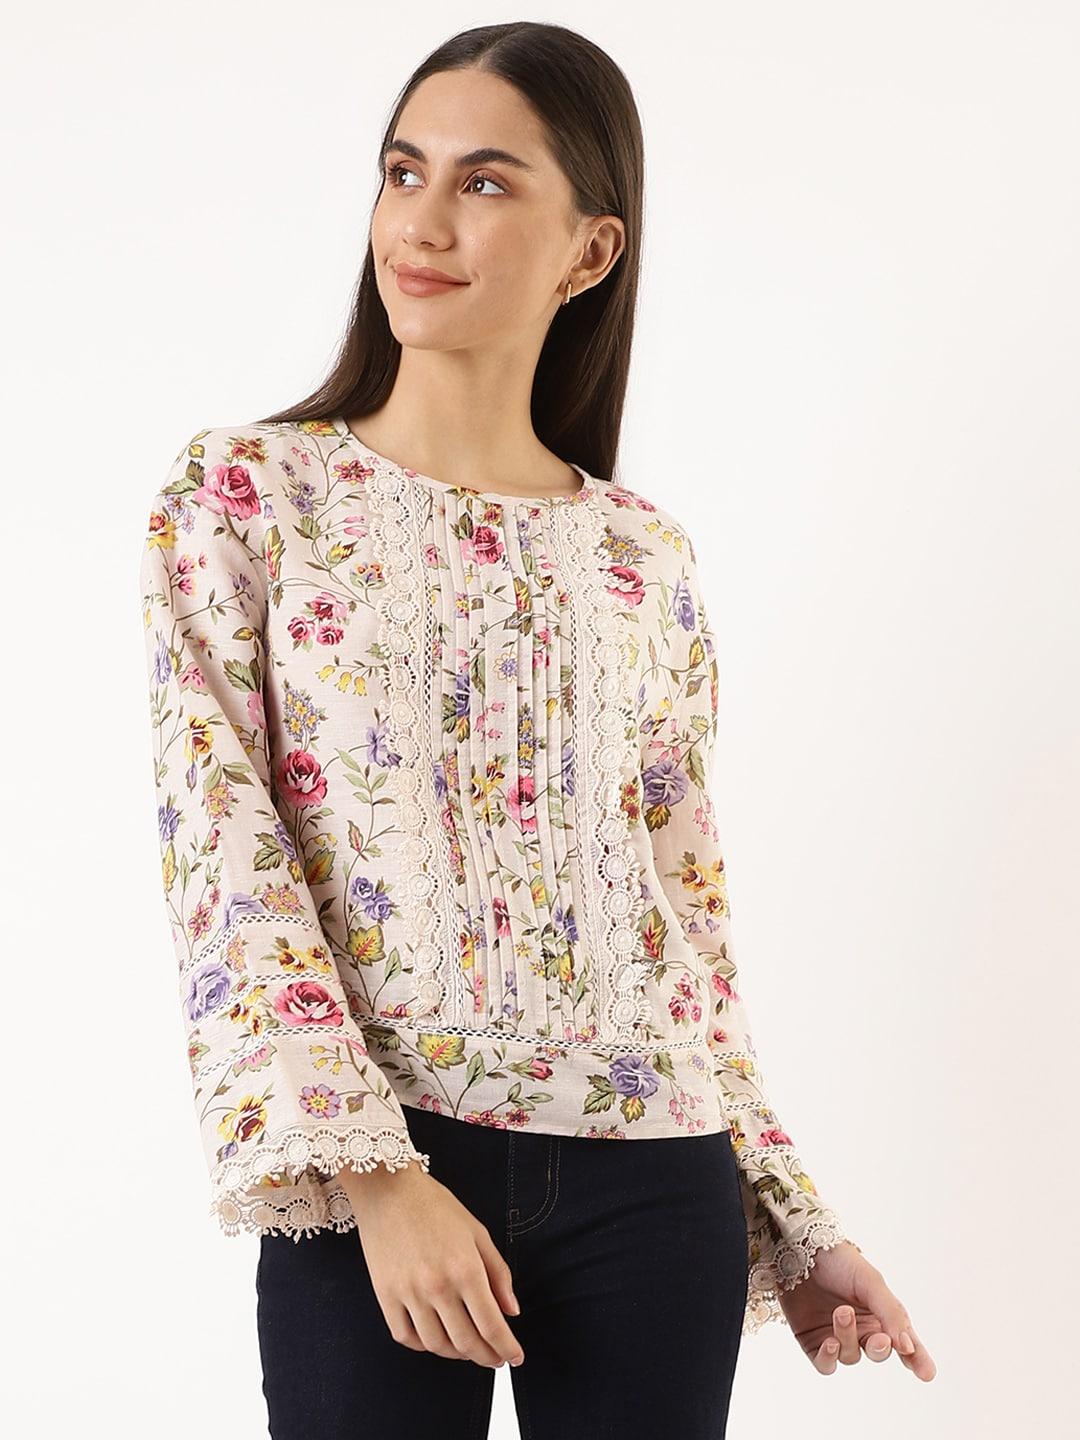 marks & spencer woman cream-coloured floral print top